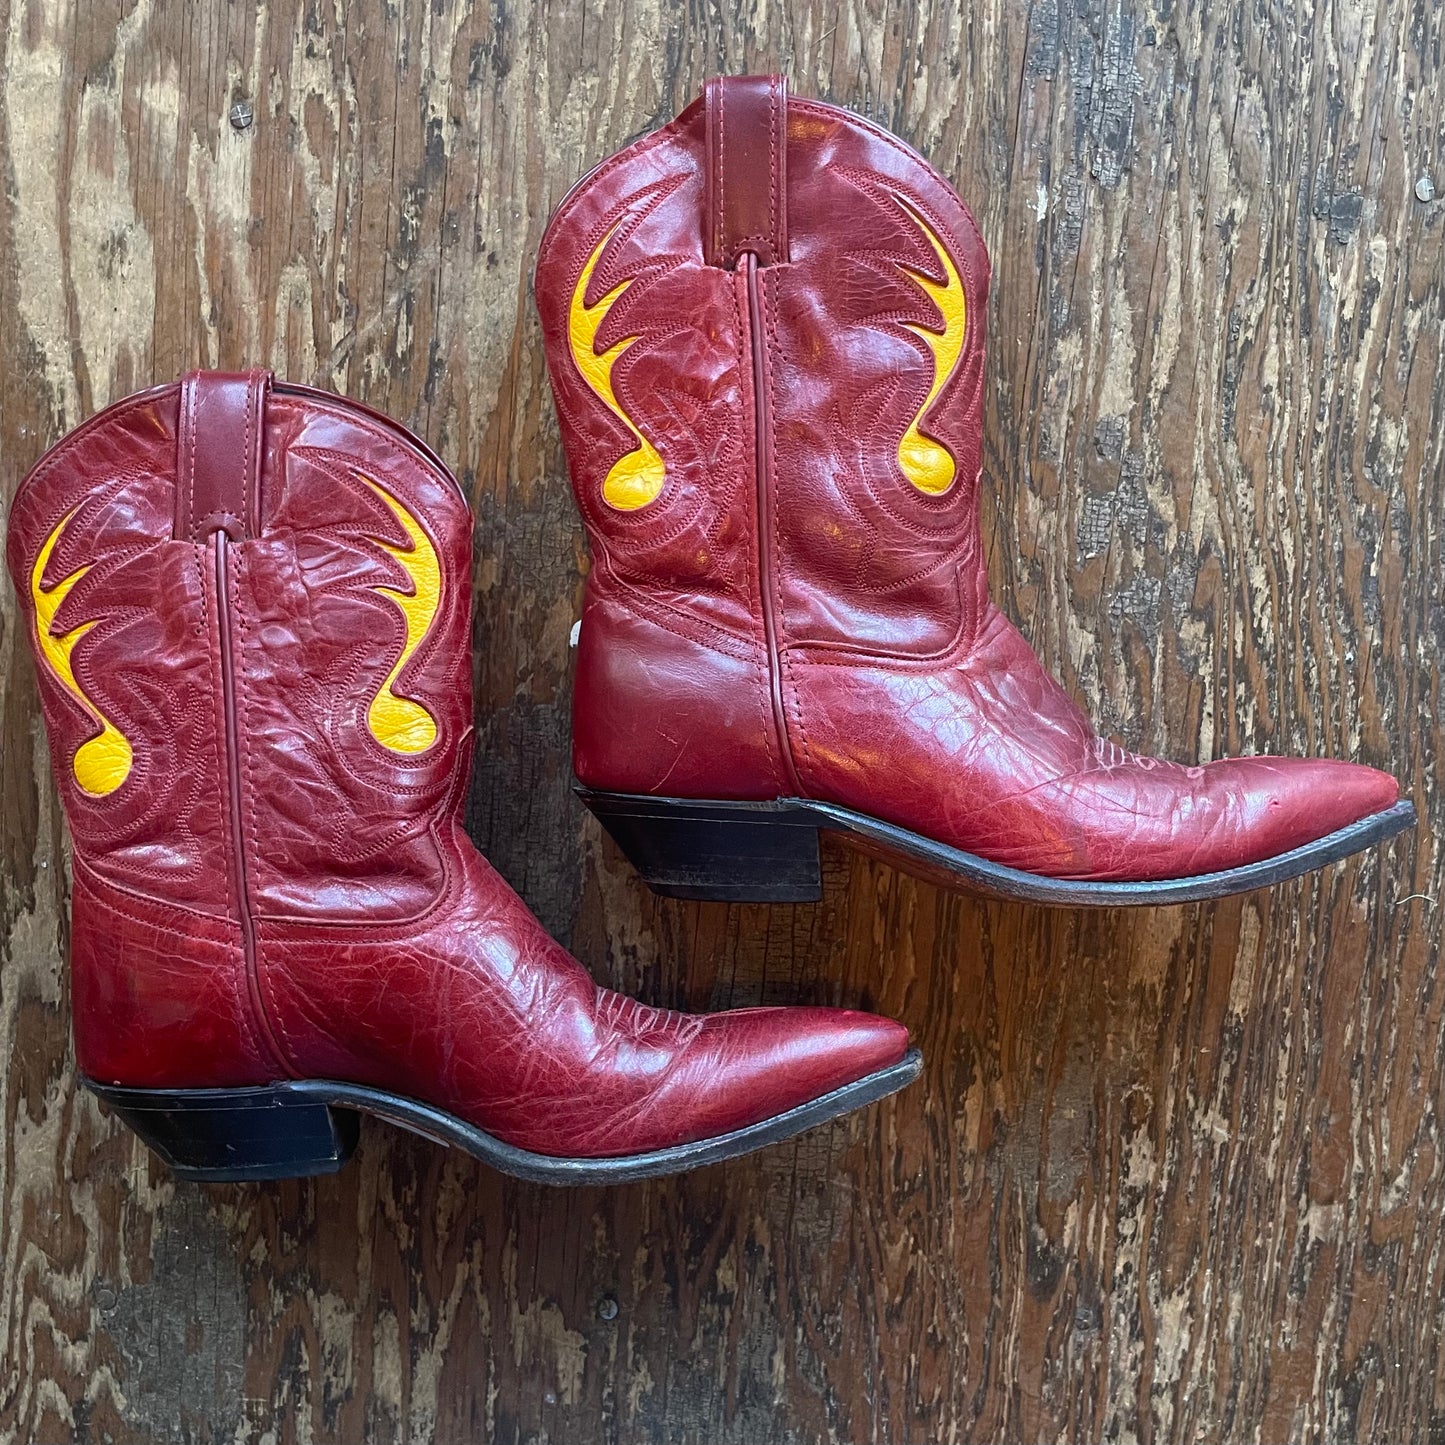 Half Calf Red and Yellow Cowboy Boots Size 7